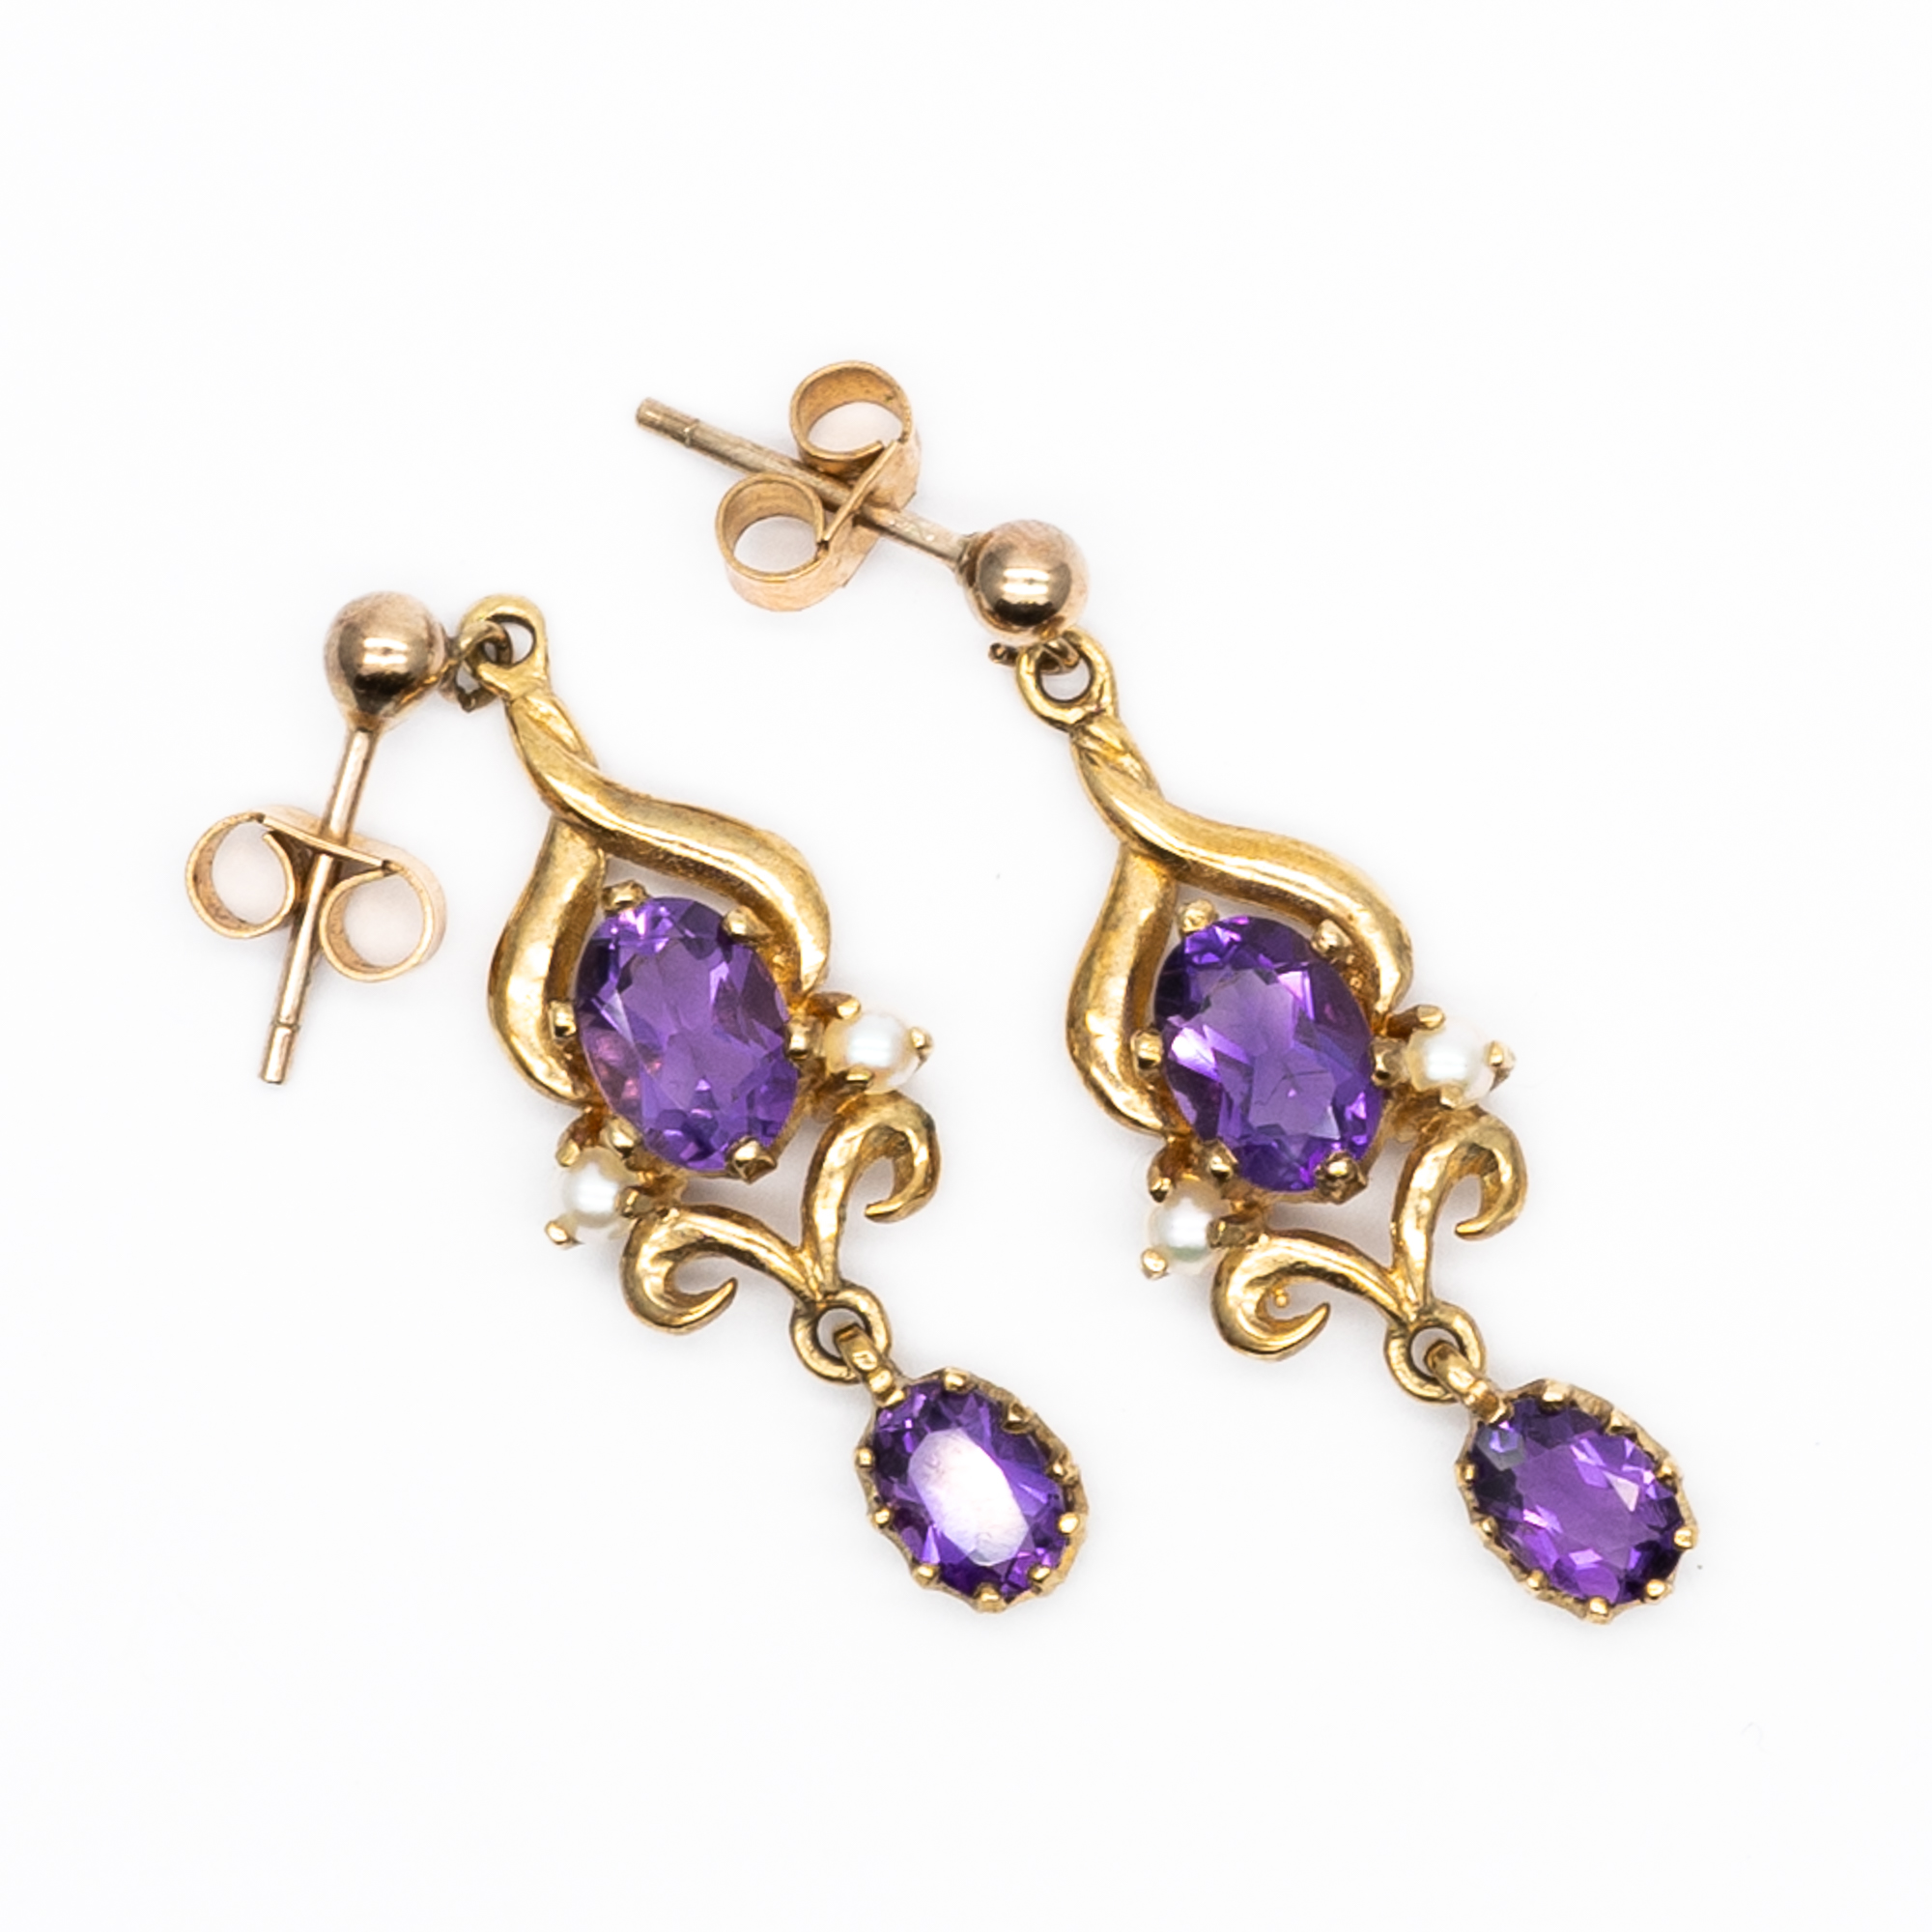 A pair of 9ct yellow gold amethyst and seed pearl drop earrings